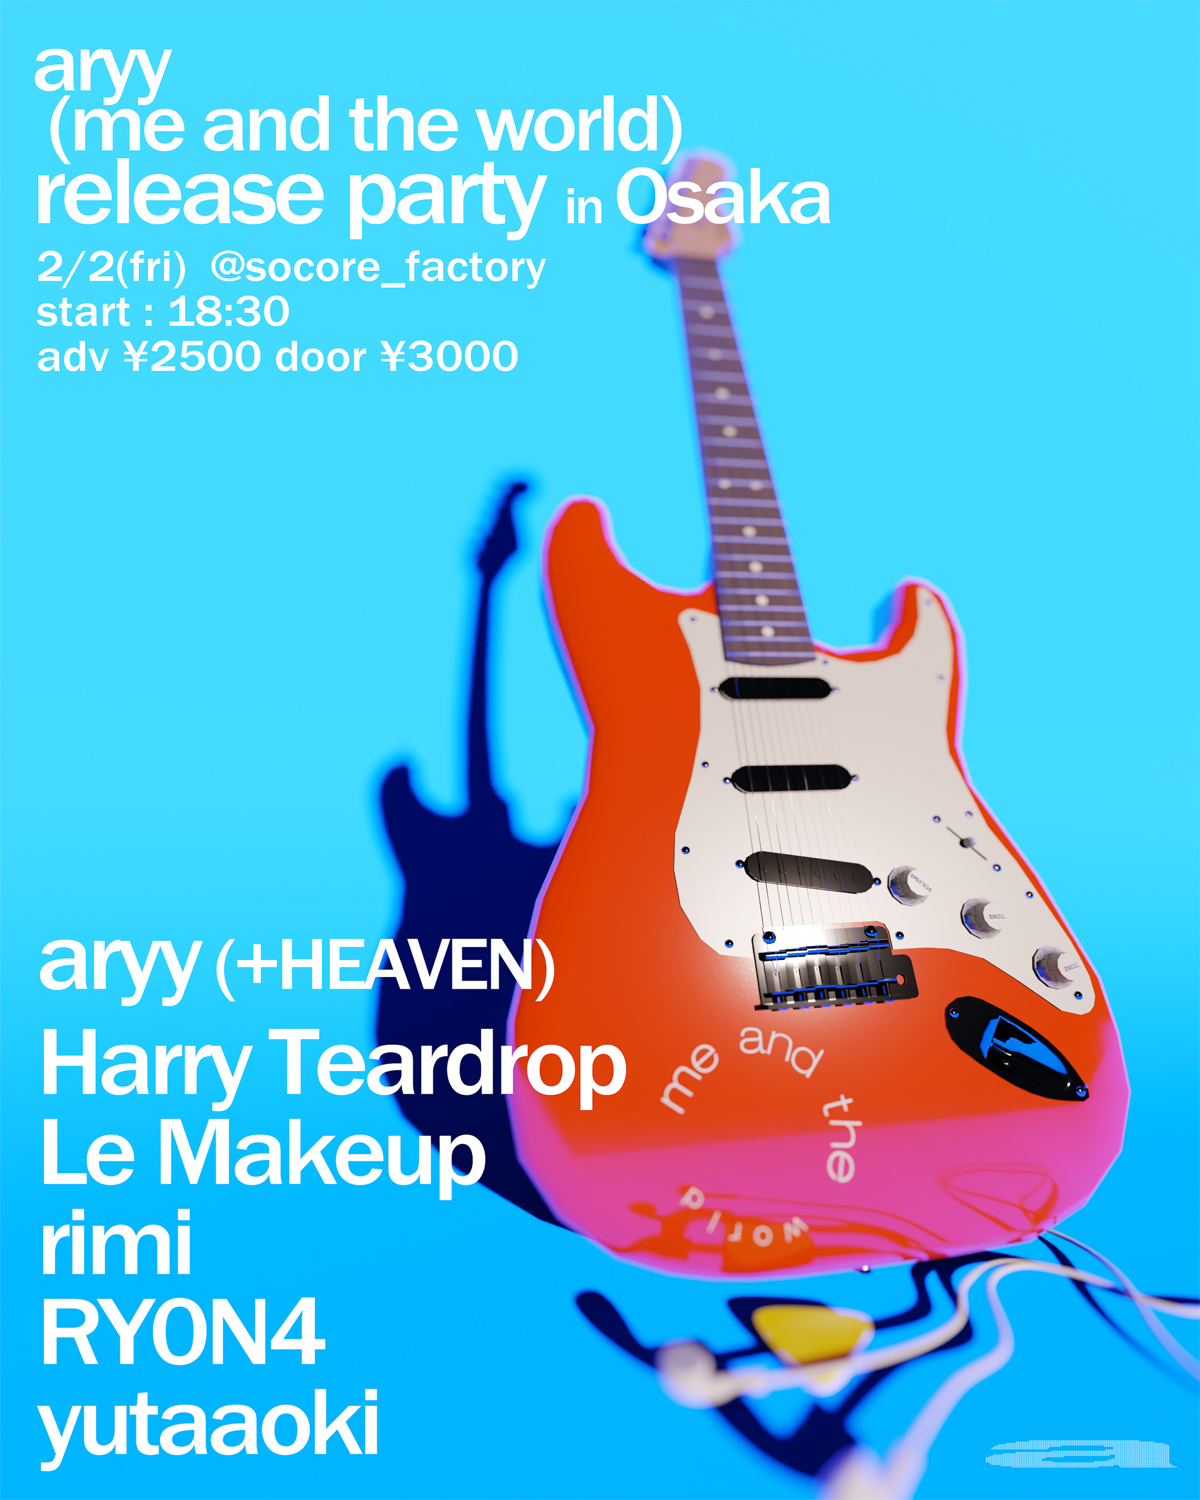 aryy "(me and the world) release party in Osaka"